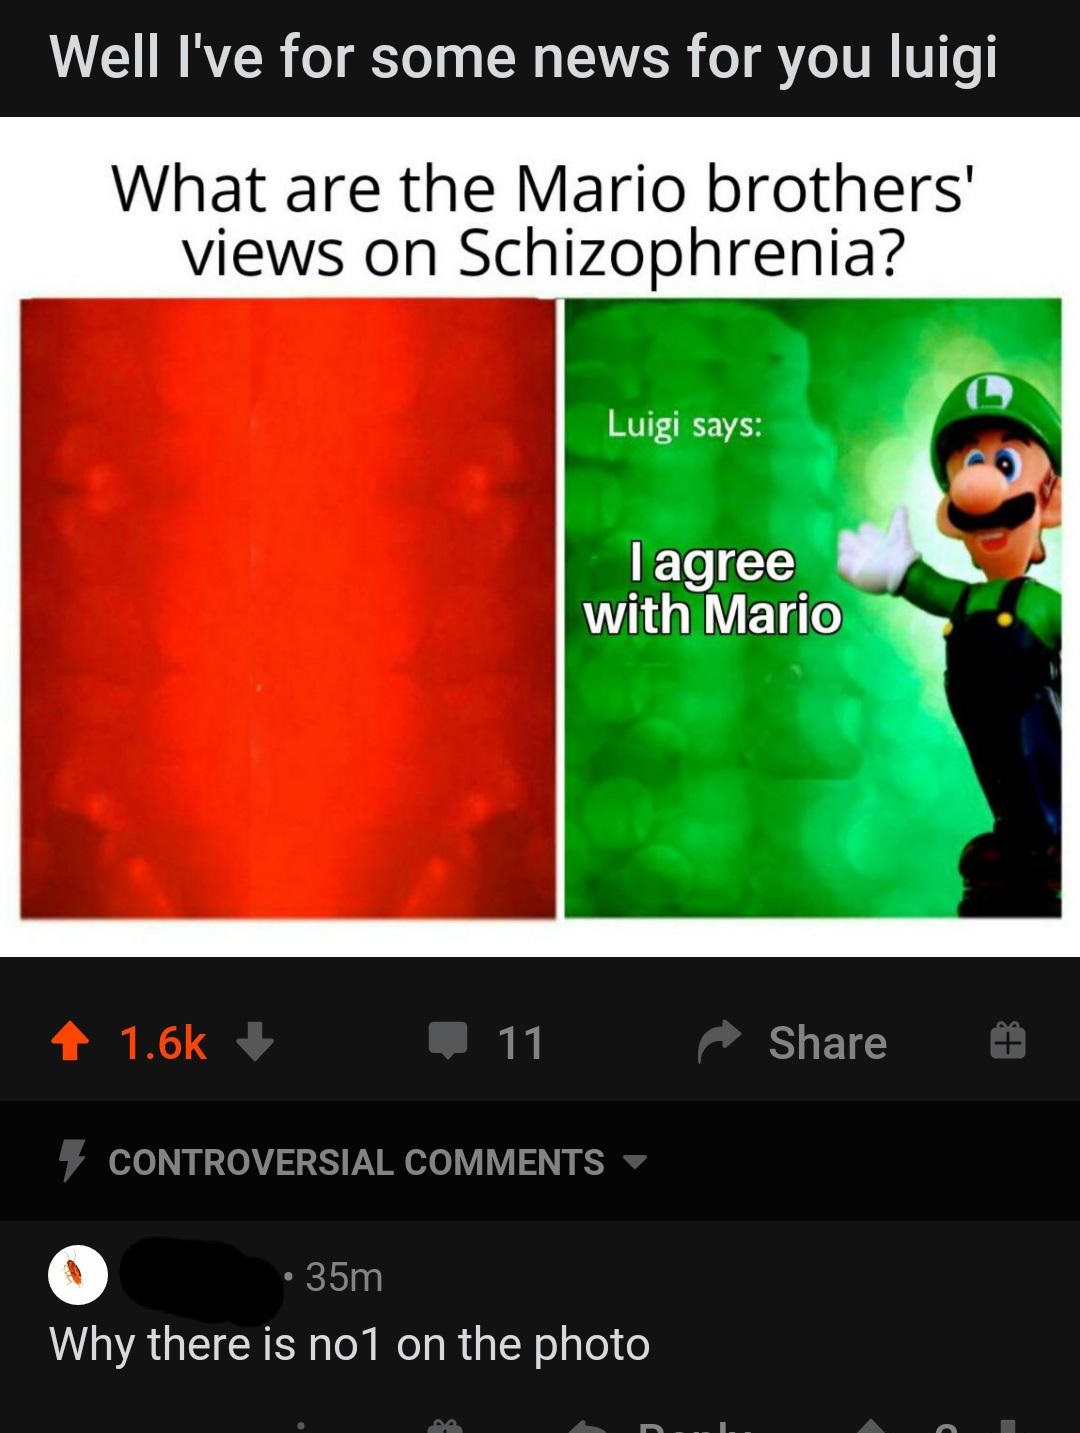 mario bros views on meme - Well I've for some news for you luigi What are the Mario brothers' views on Schizophrenia? Luigi says I agree with Mario 11 Controversial 35m Why there is no1 on the photo